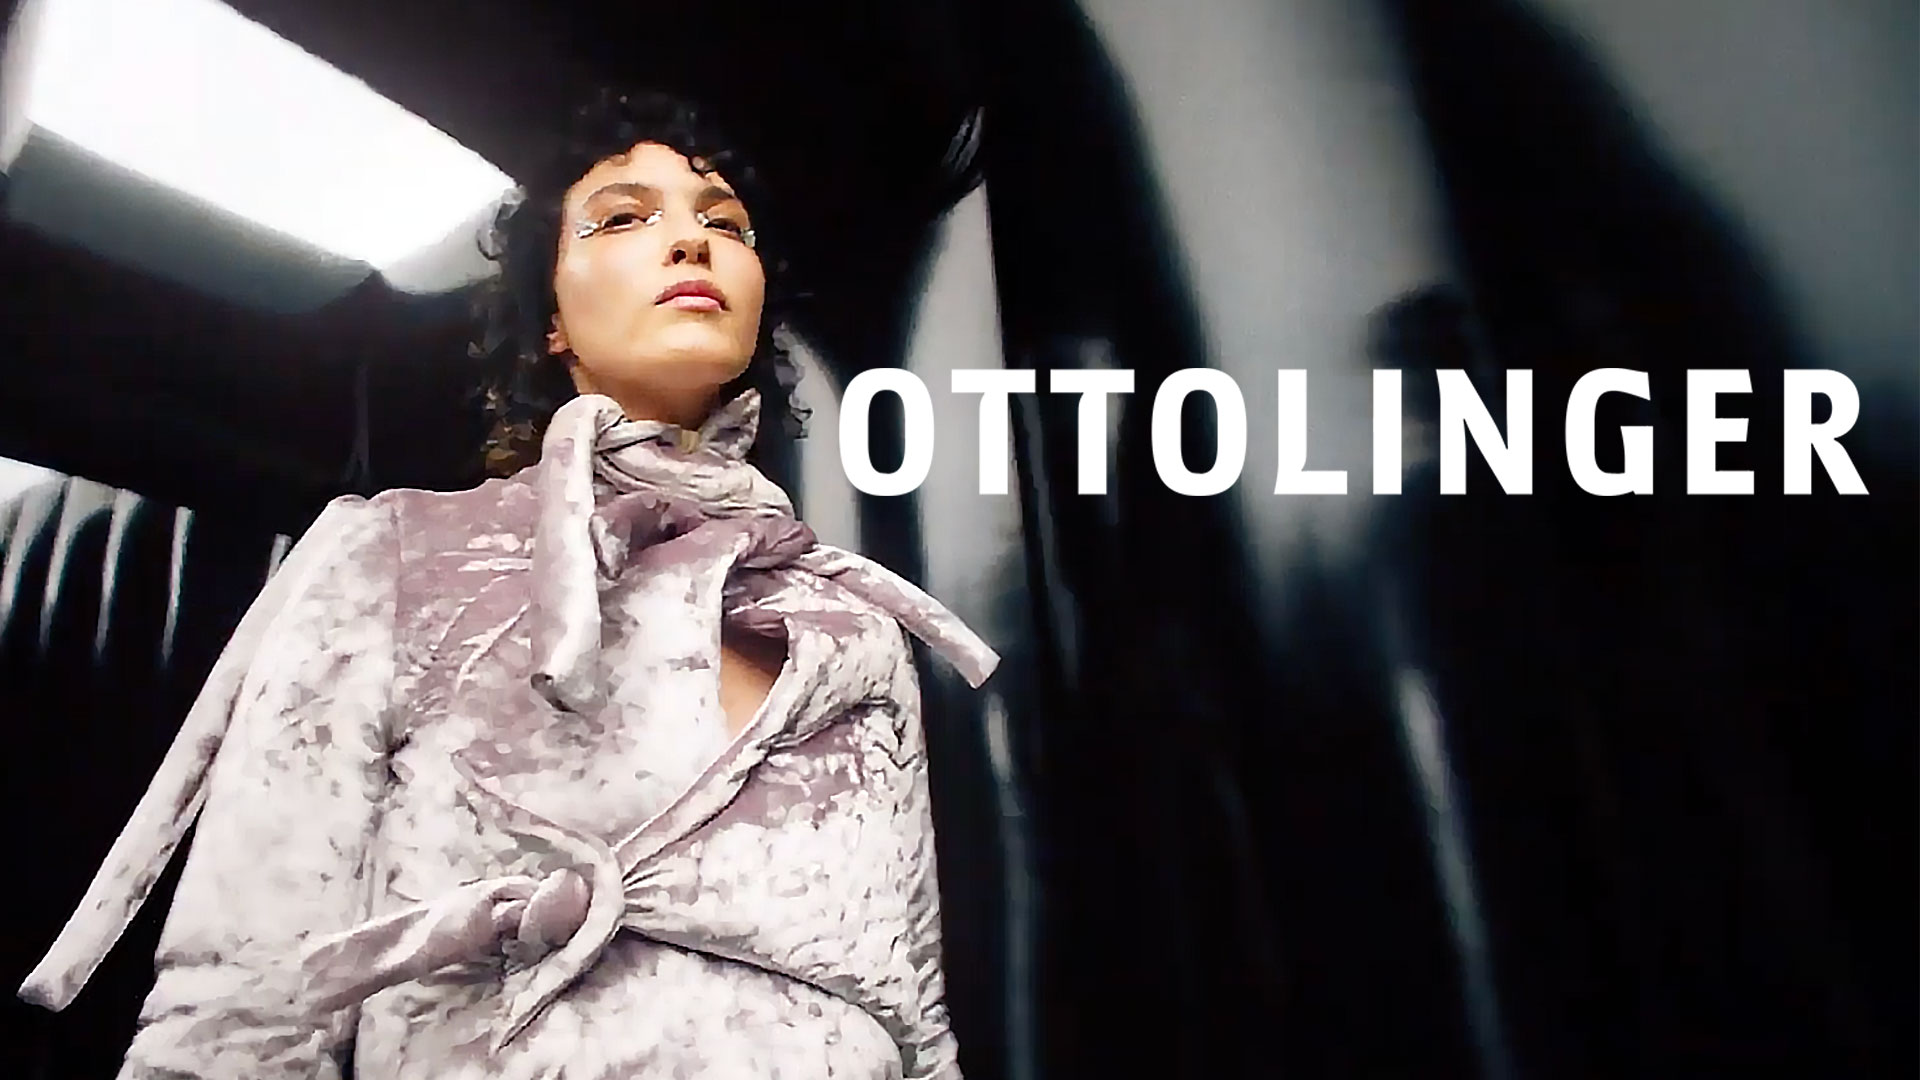 FALL-WINTER 2022/2023 OTTOLINGER PARIS READY-TO-WEAR COLLECTION